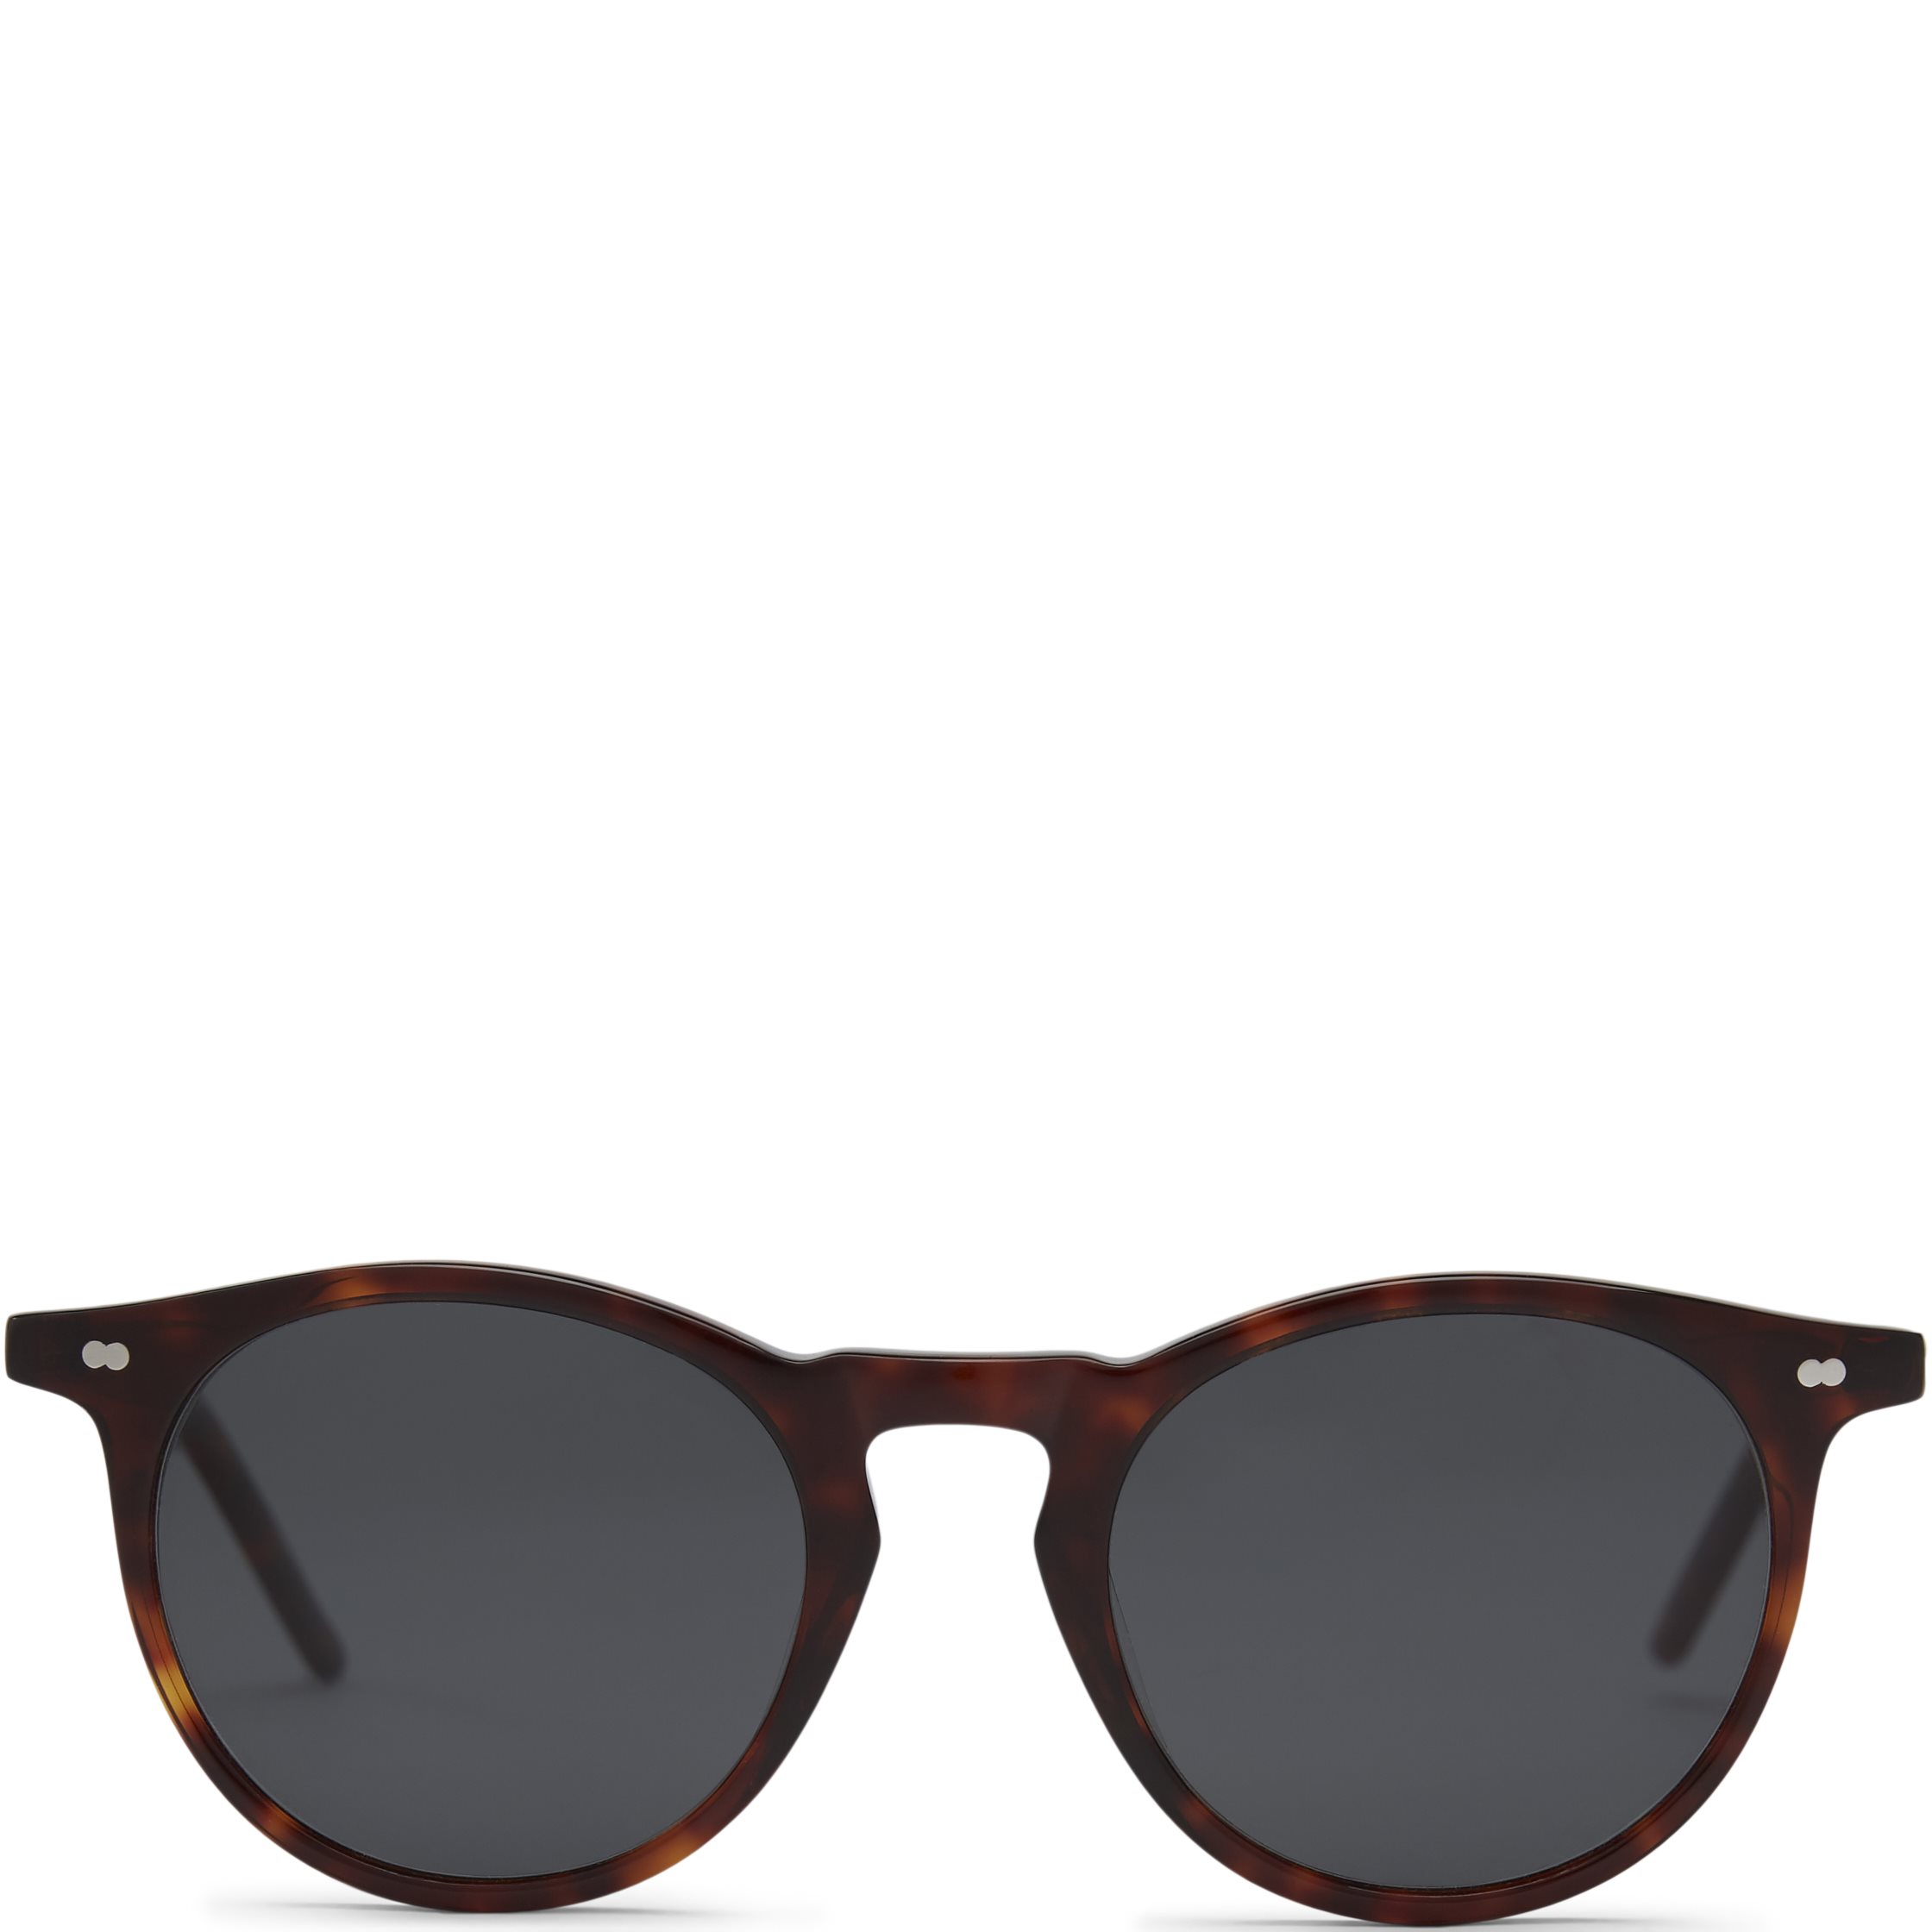 Christopher Cloos Accessories PALOMA SUNGLASSES Brun